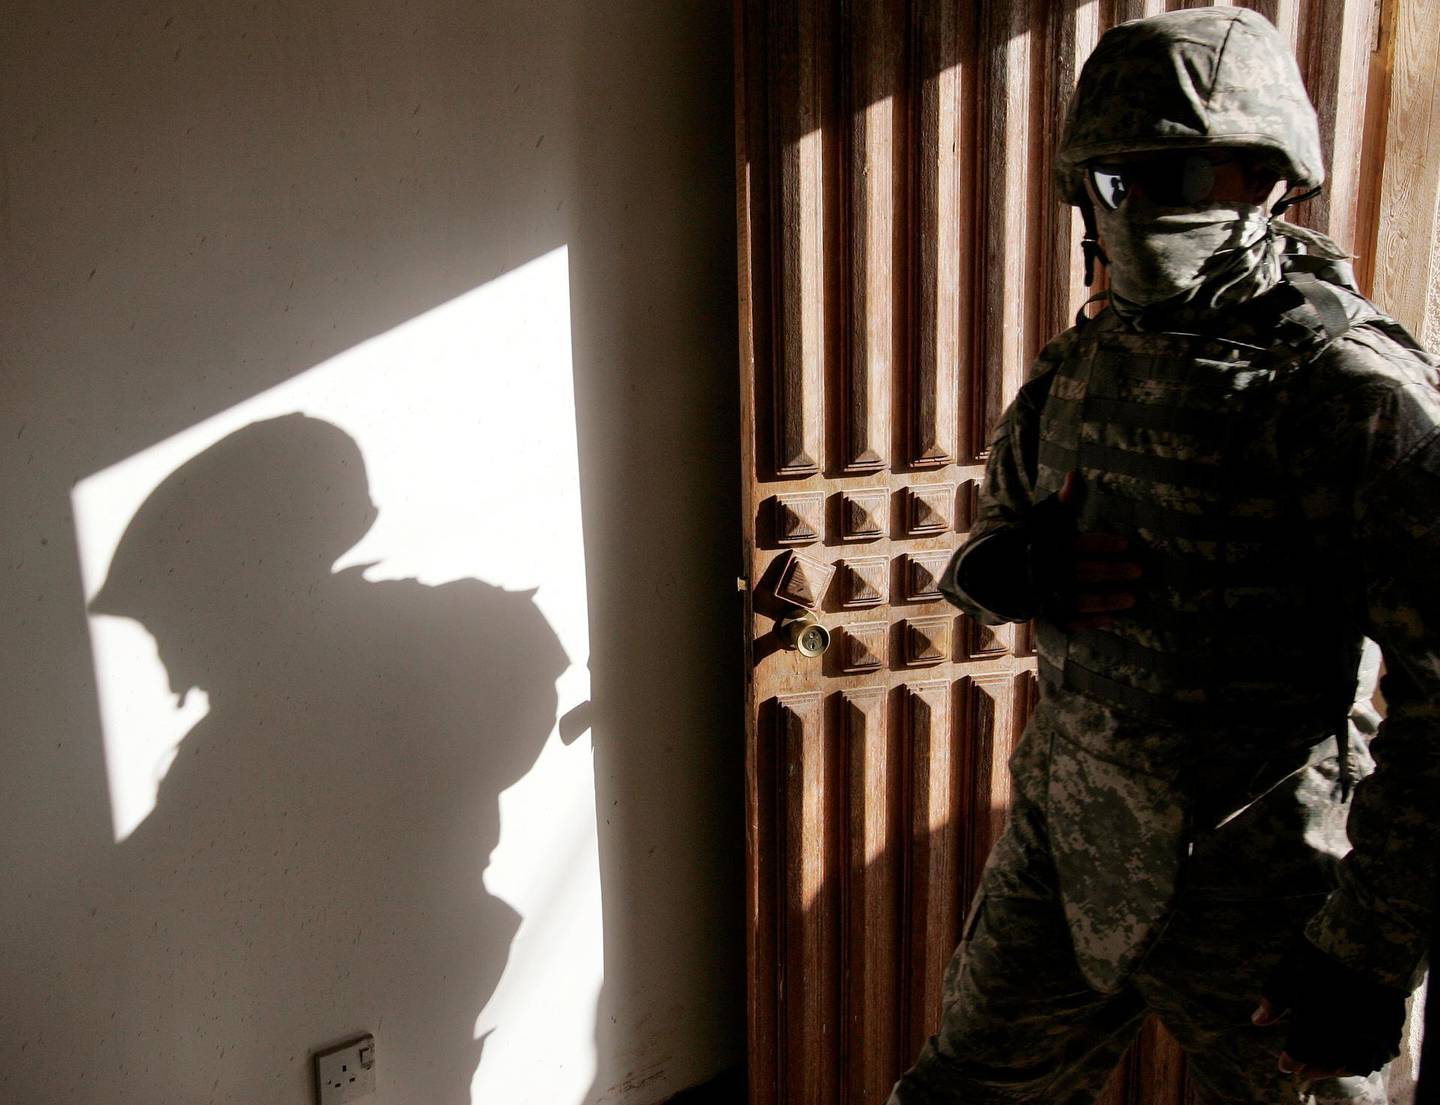 FILE PHOTO: An Iraqi interpreter enters a house during a patrol with U.S. army Alpha Company 1-64 Armored in the neighborhood of Adl in Baghdad November 7, 2007.   REUTERS/Stefano Rellandini/File Photo